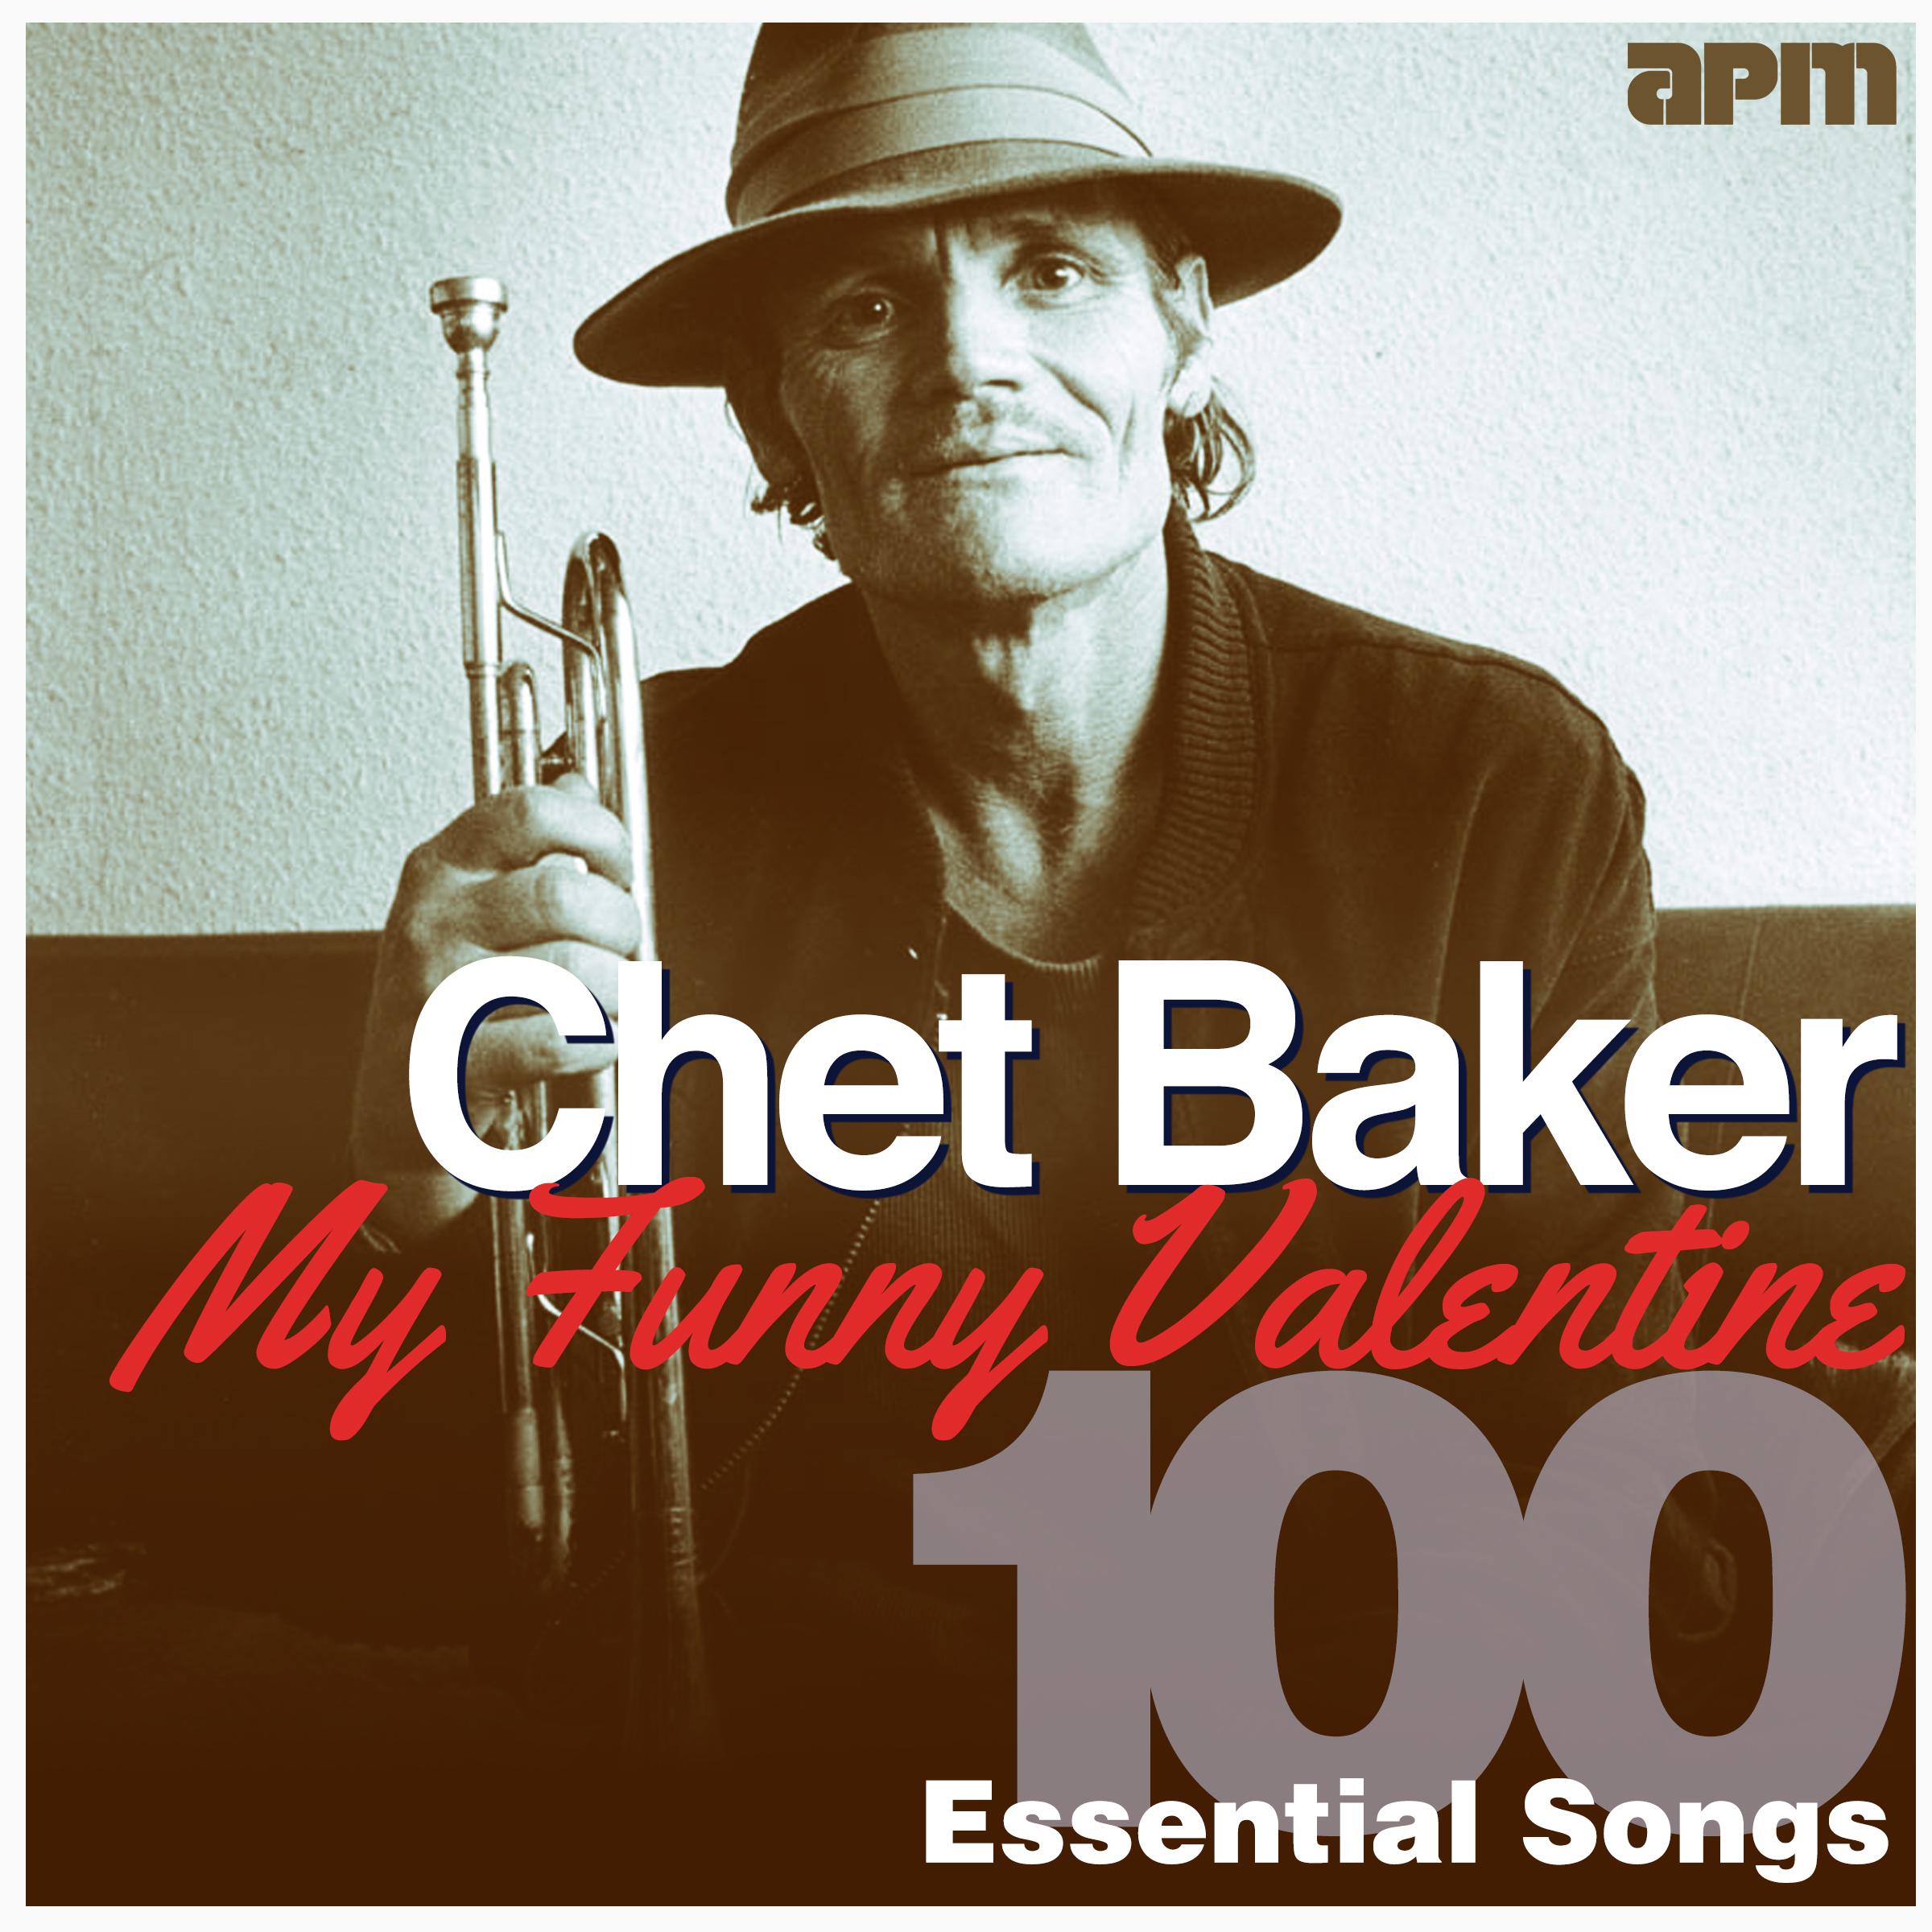 My Funny Valentine - 100 Essential Songs